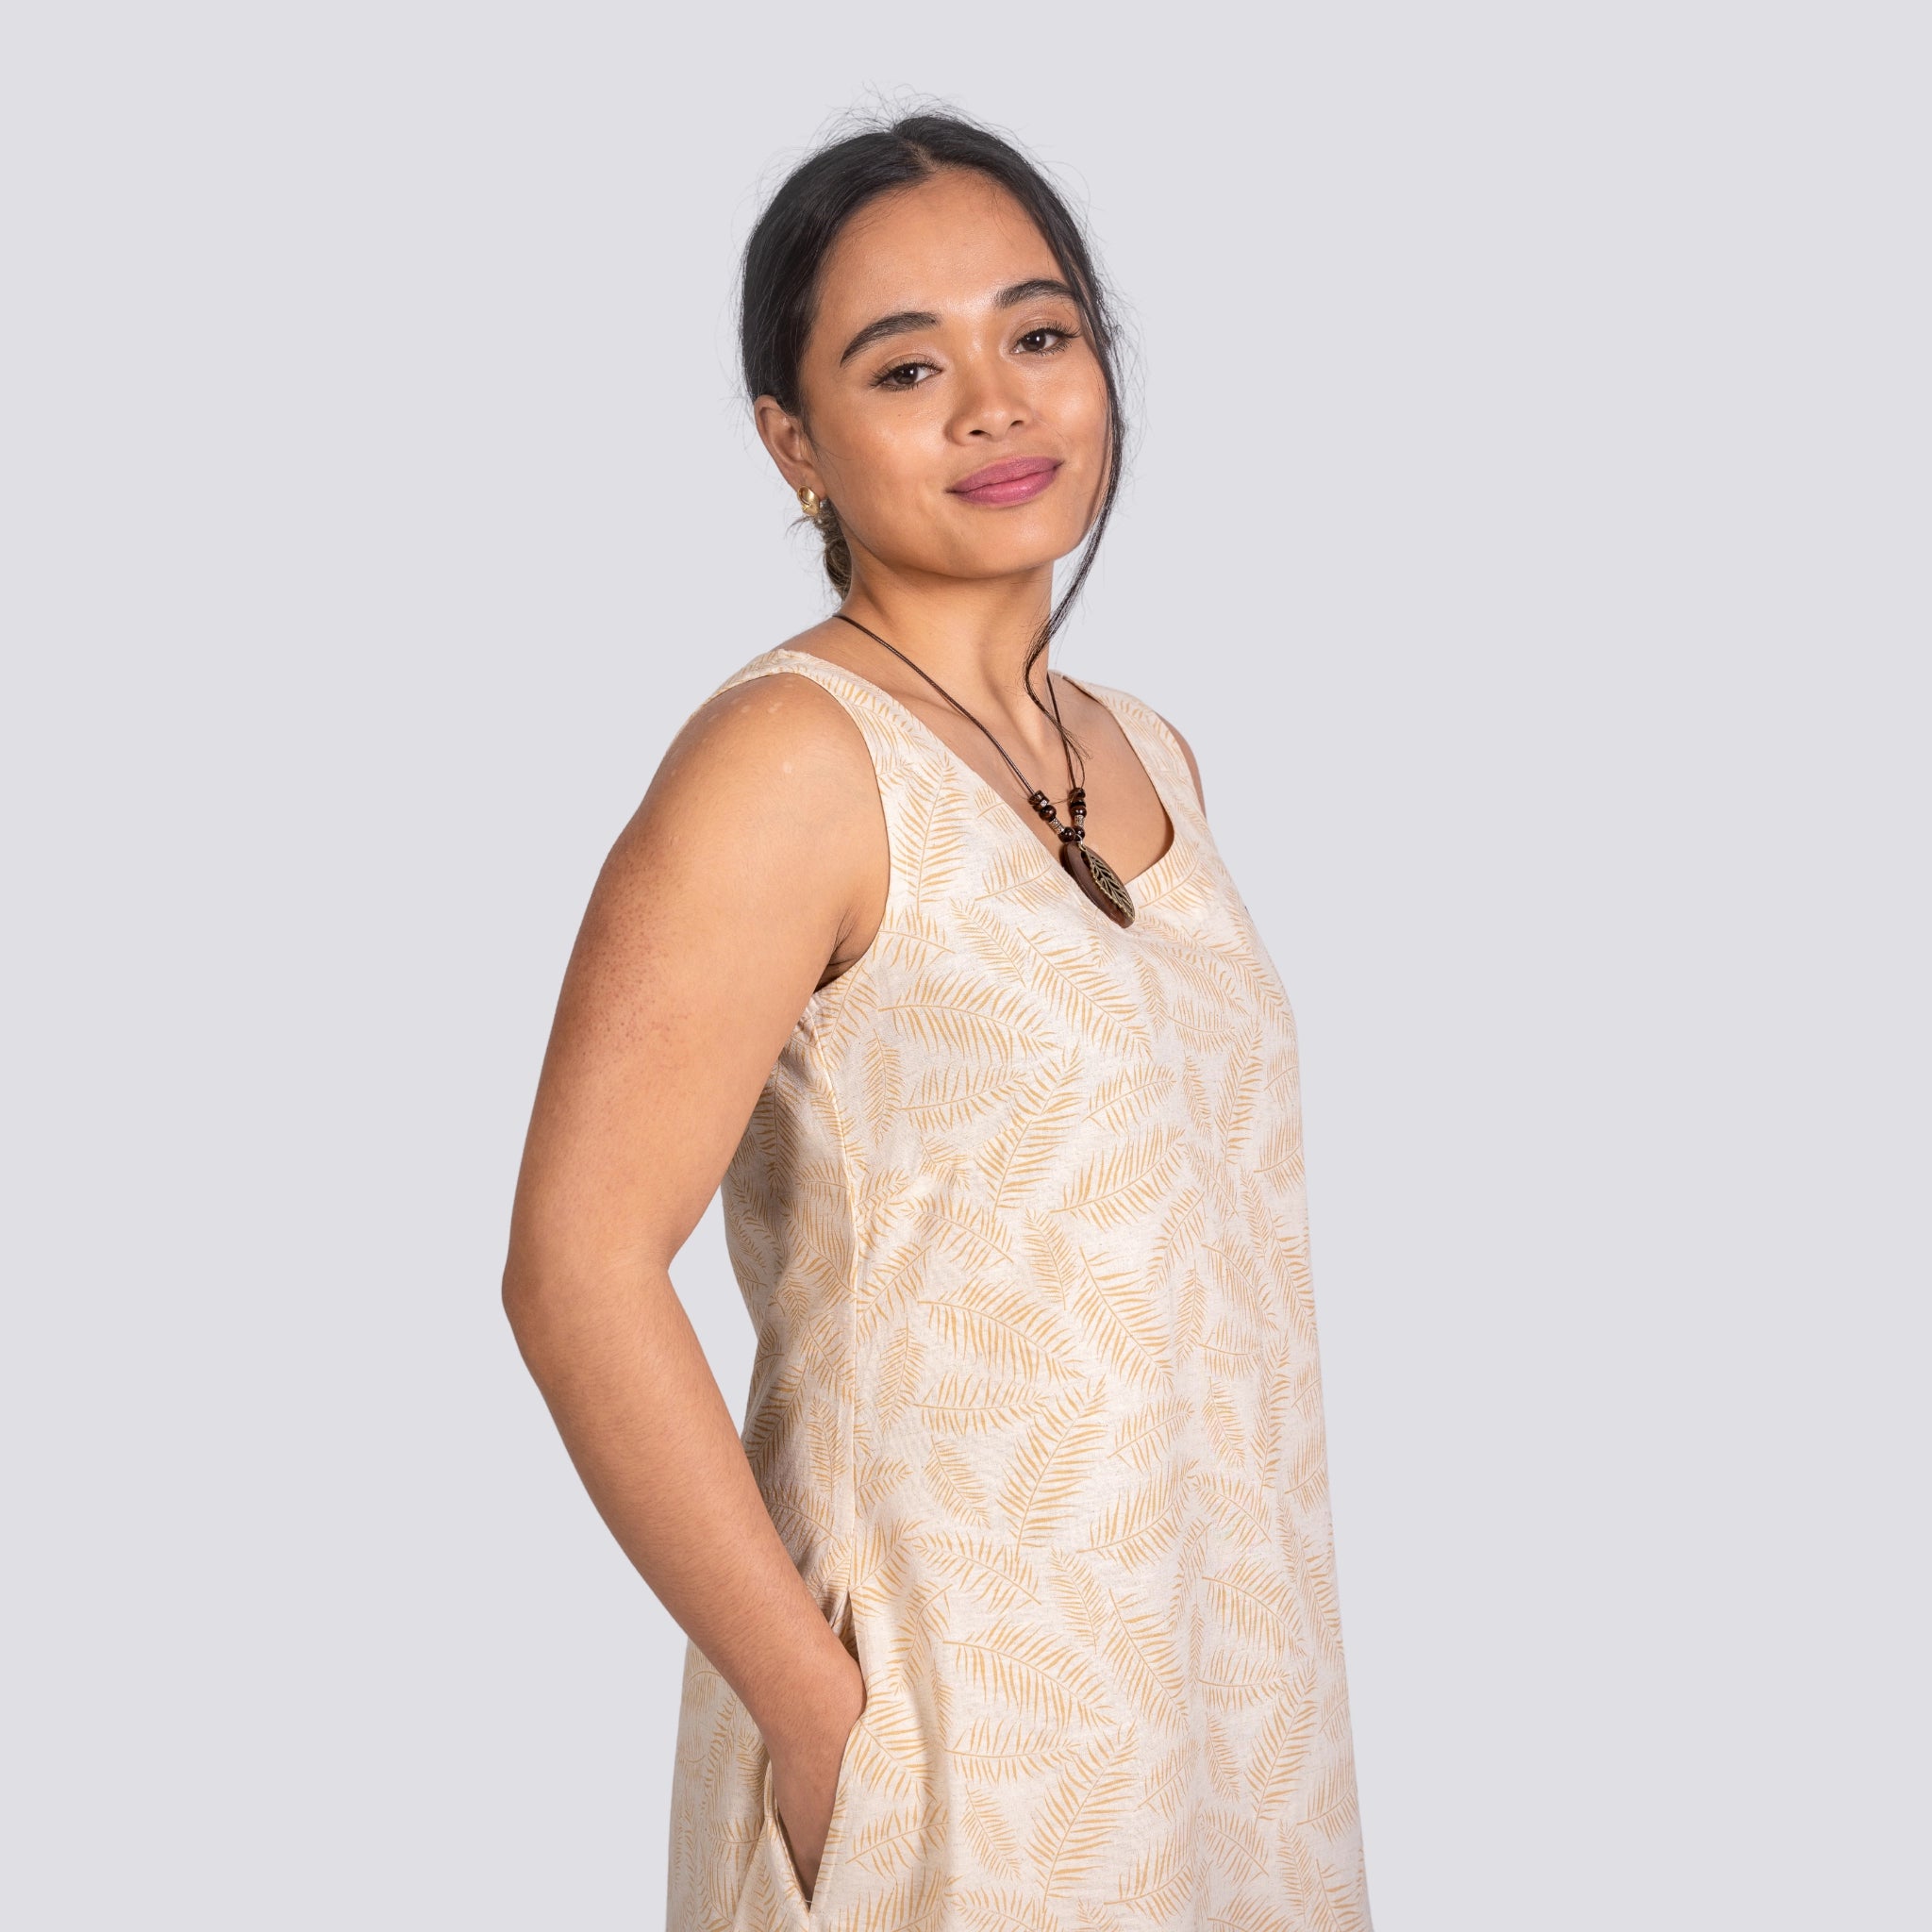 A young woman wearing a Karee Mystic Serenity High Low Linen Cotton Midi Dress with a palm leaf pattern, standing sideways, smiling subtly at the camera.